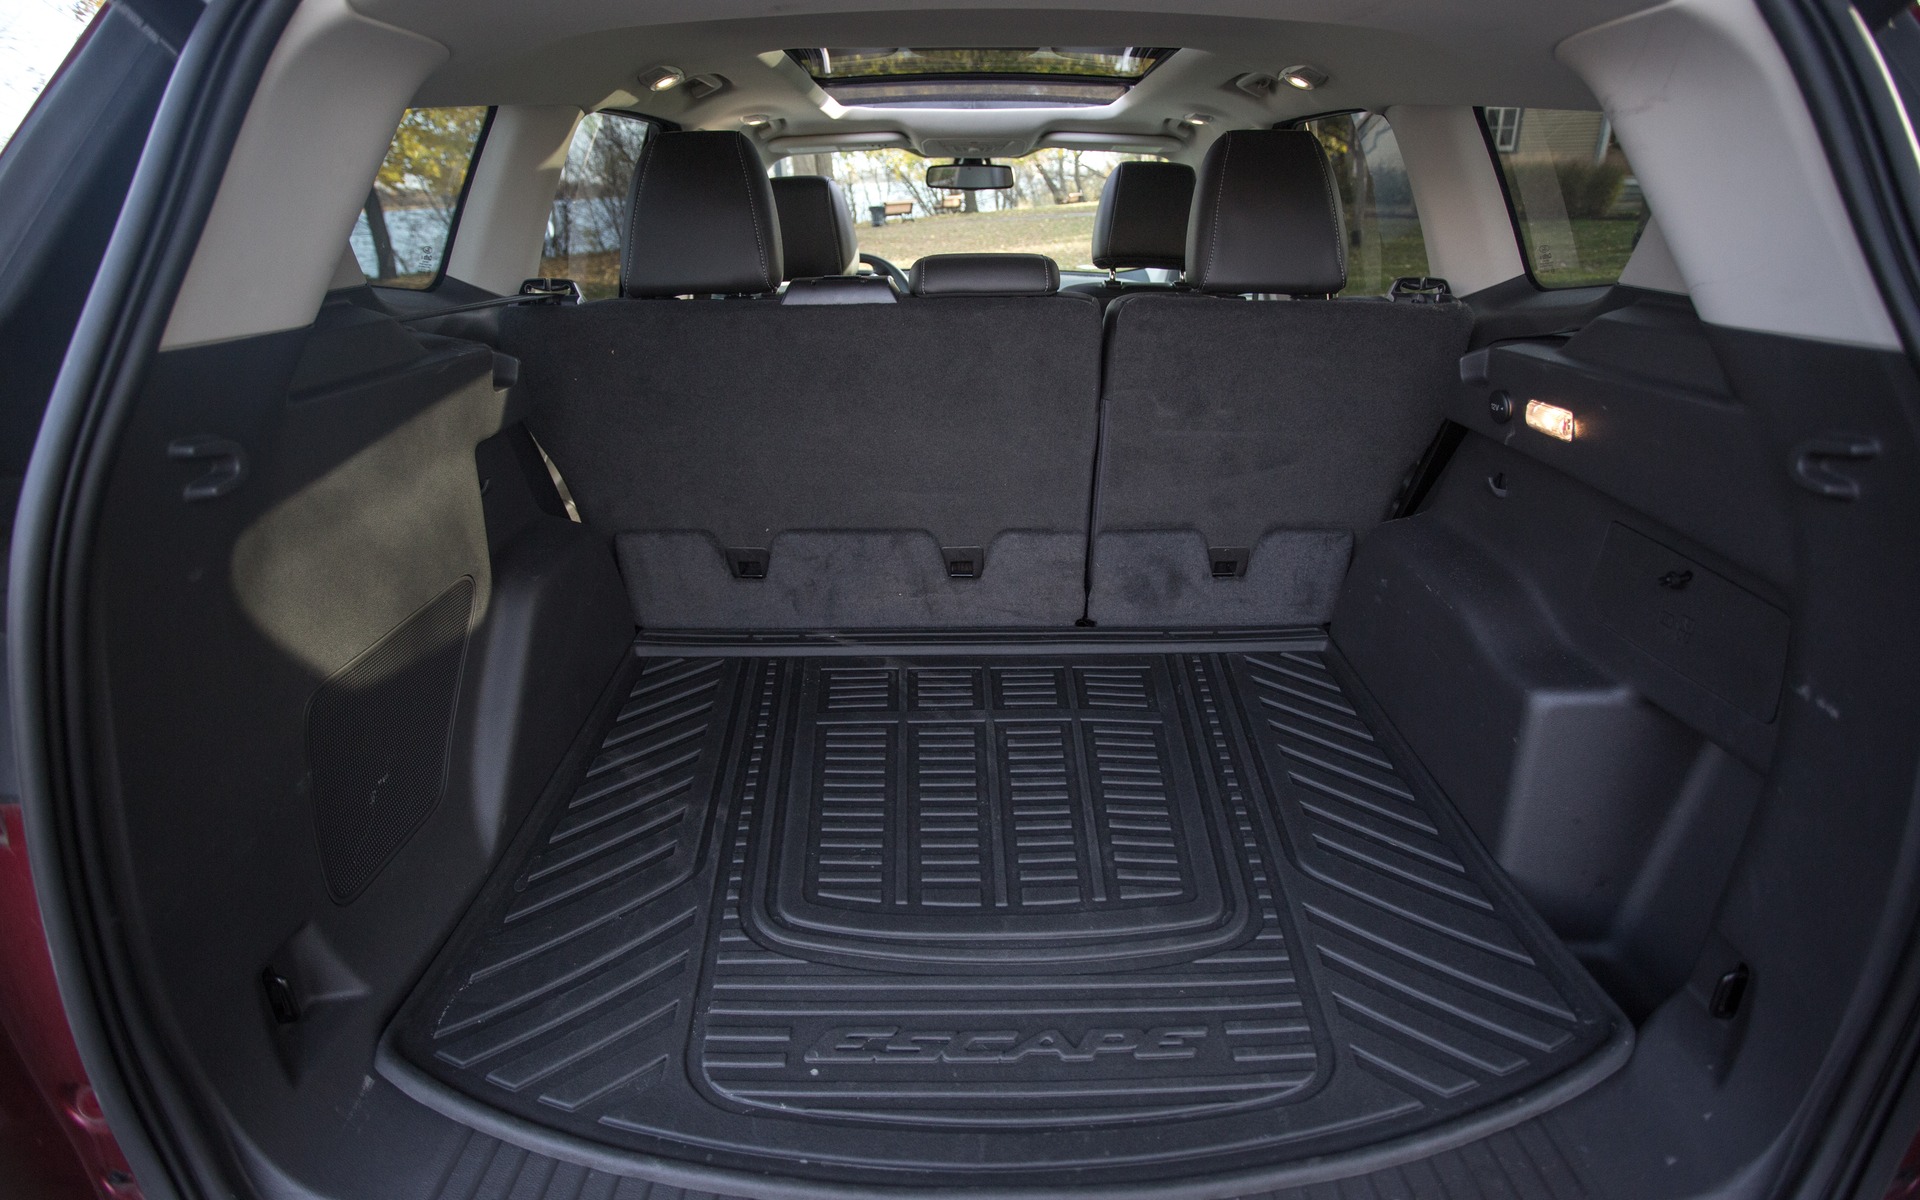 The Ford Escape has a vast cargo area.